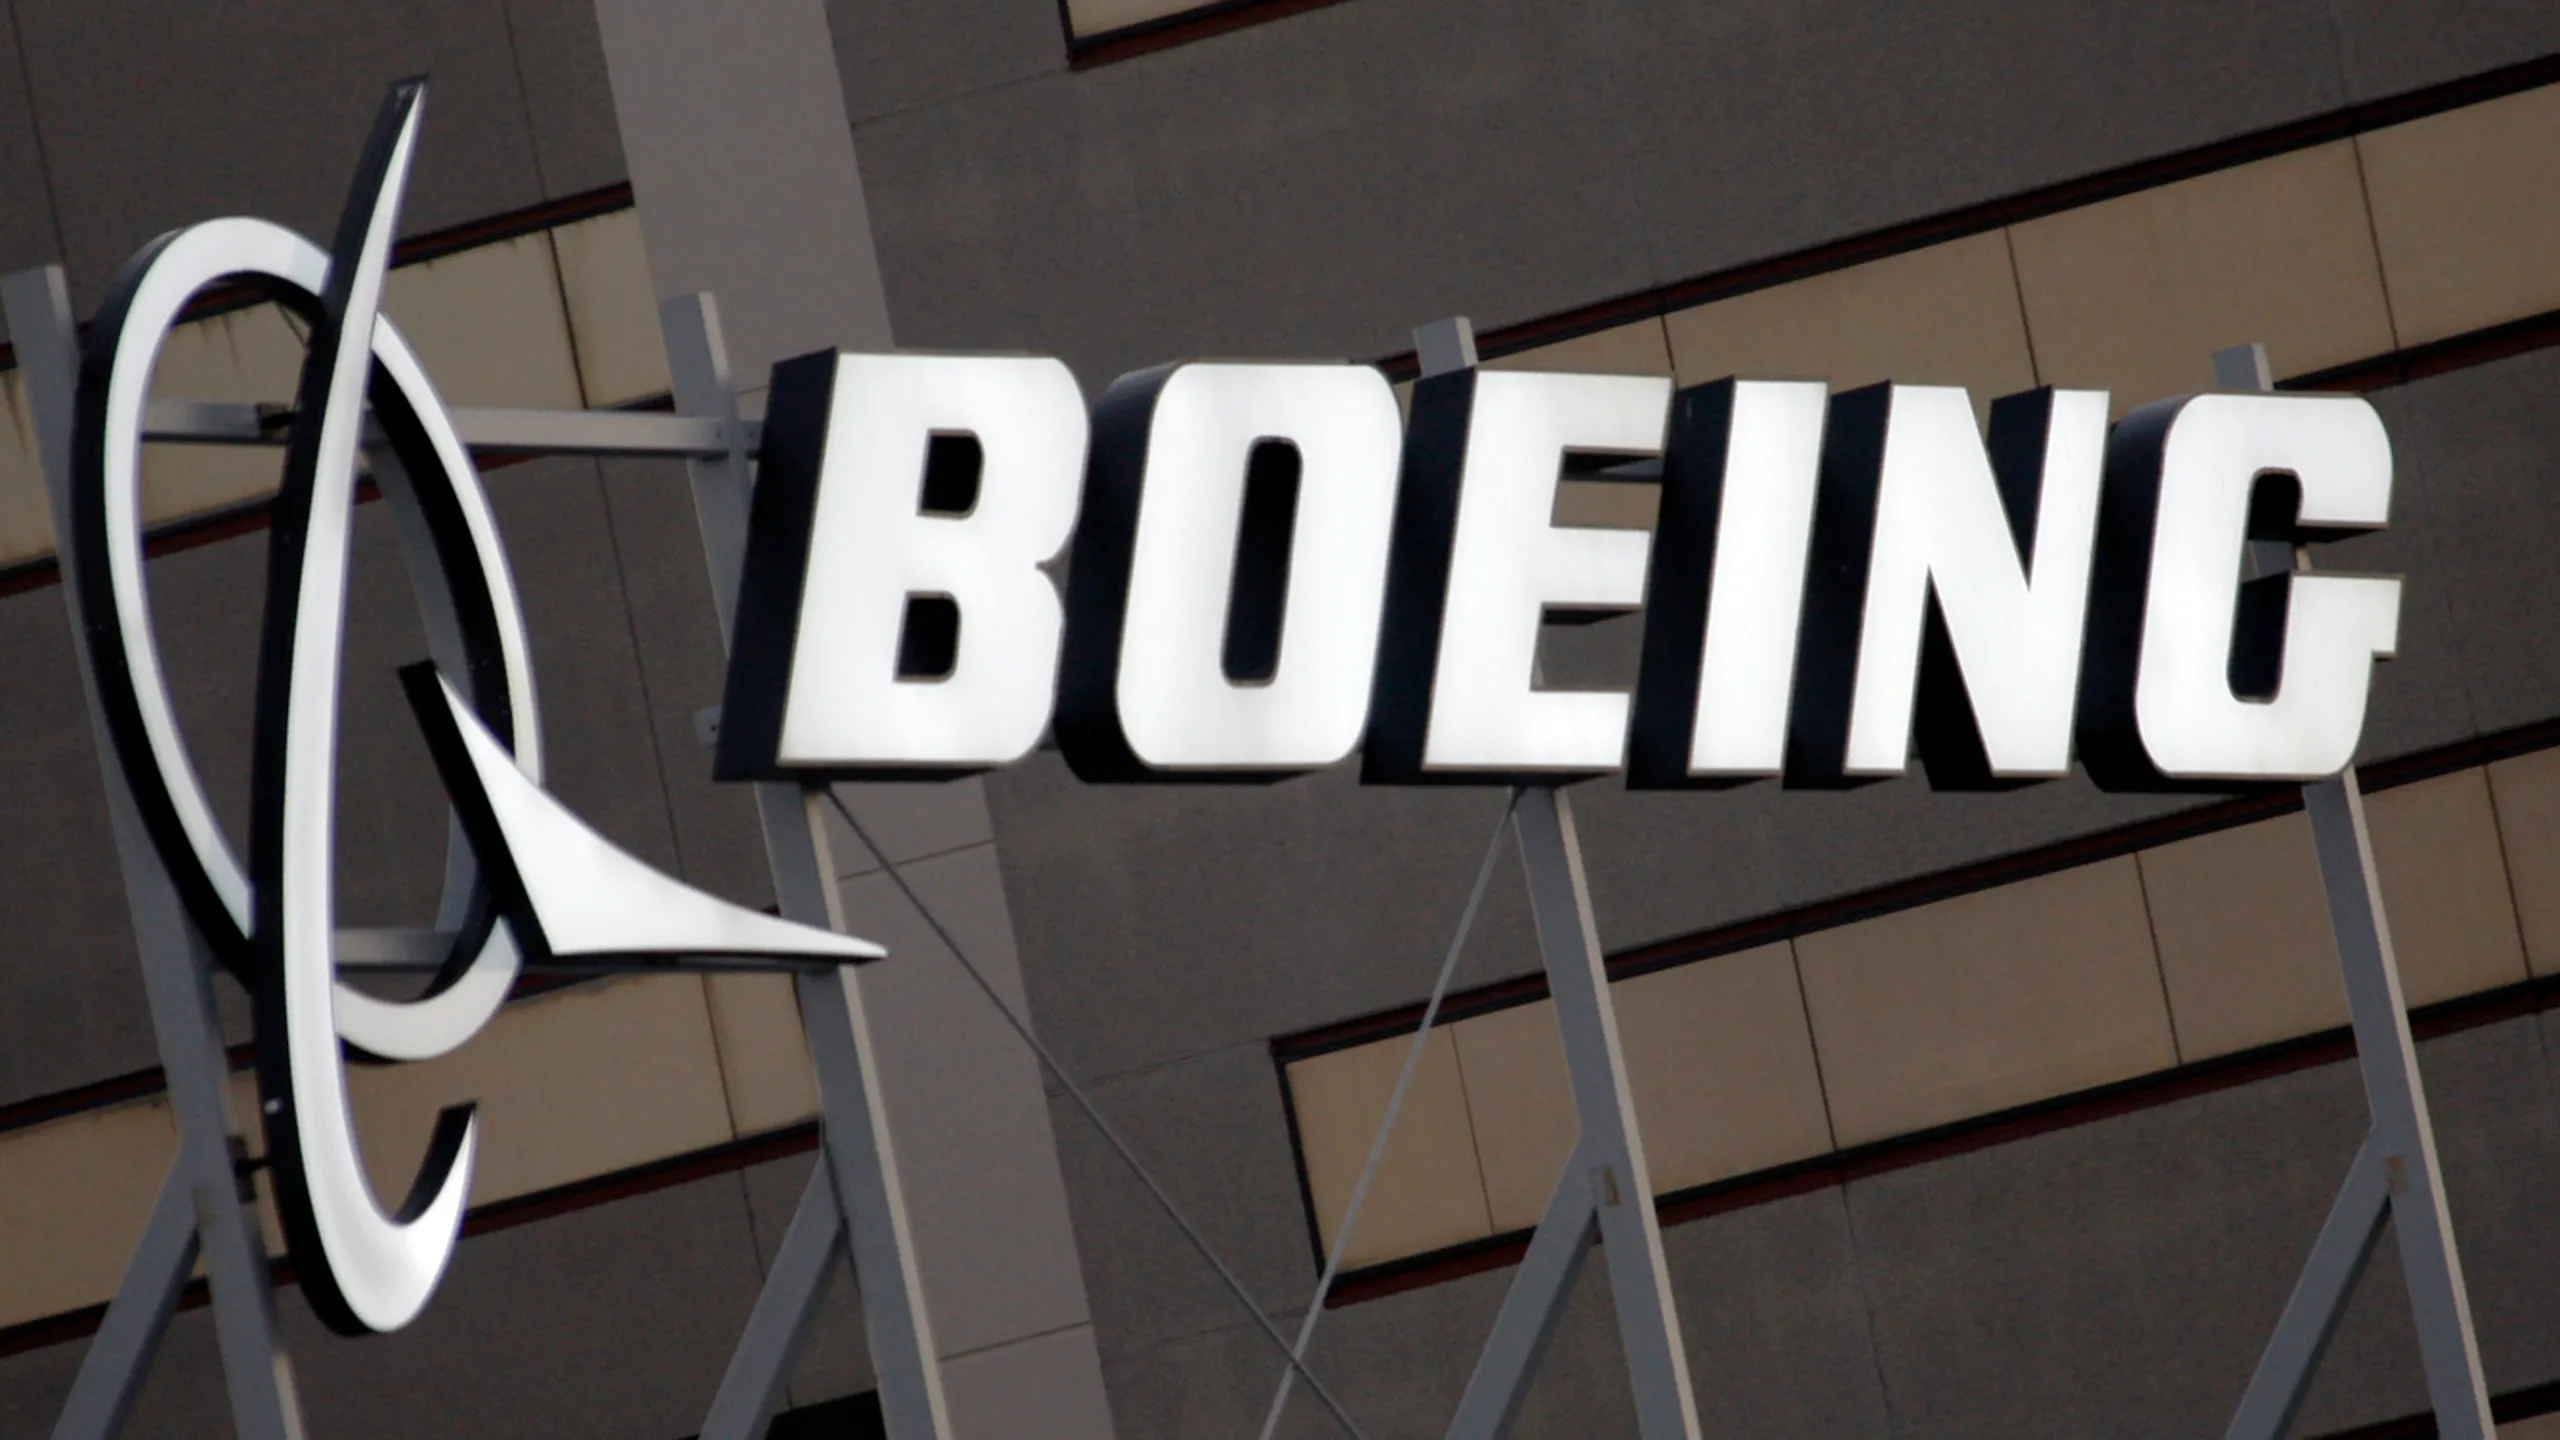 Boeing Is About To Lock Out Its Private Firemen in the Seattle Area Due to a Wage Disagreement